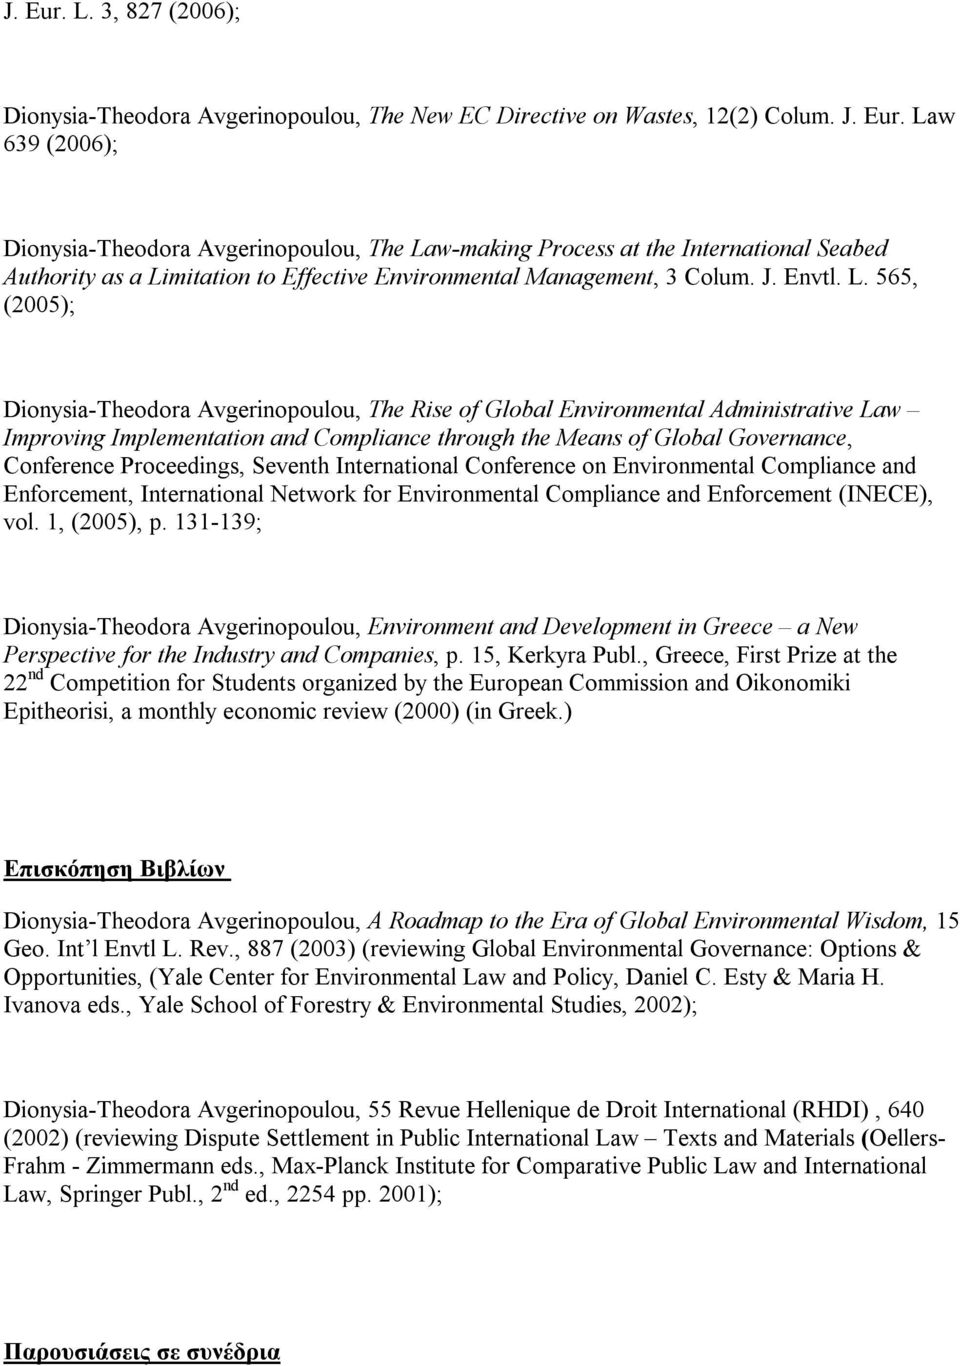 565, (2005); Dionysia-Theodora Avgerinopoulou, The Rise of Global Environmental Administrative Law Improving Implementation and Compliance through the Means of Global Governance, Conference